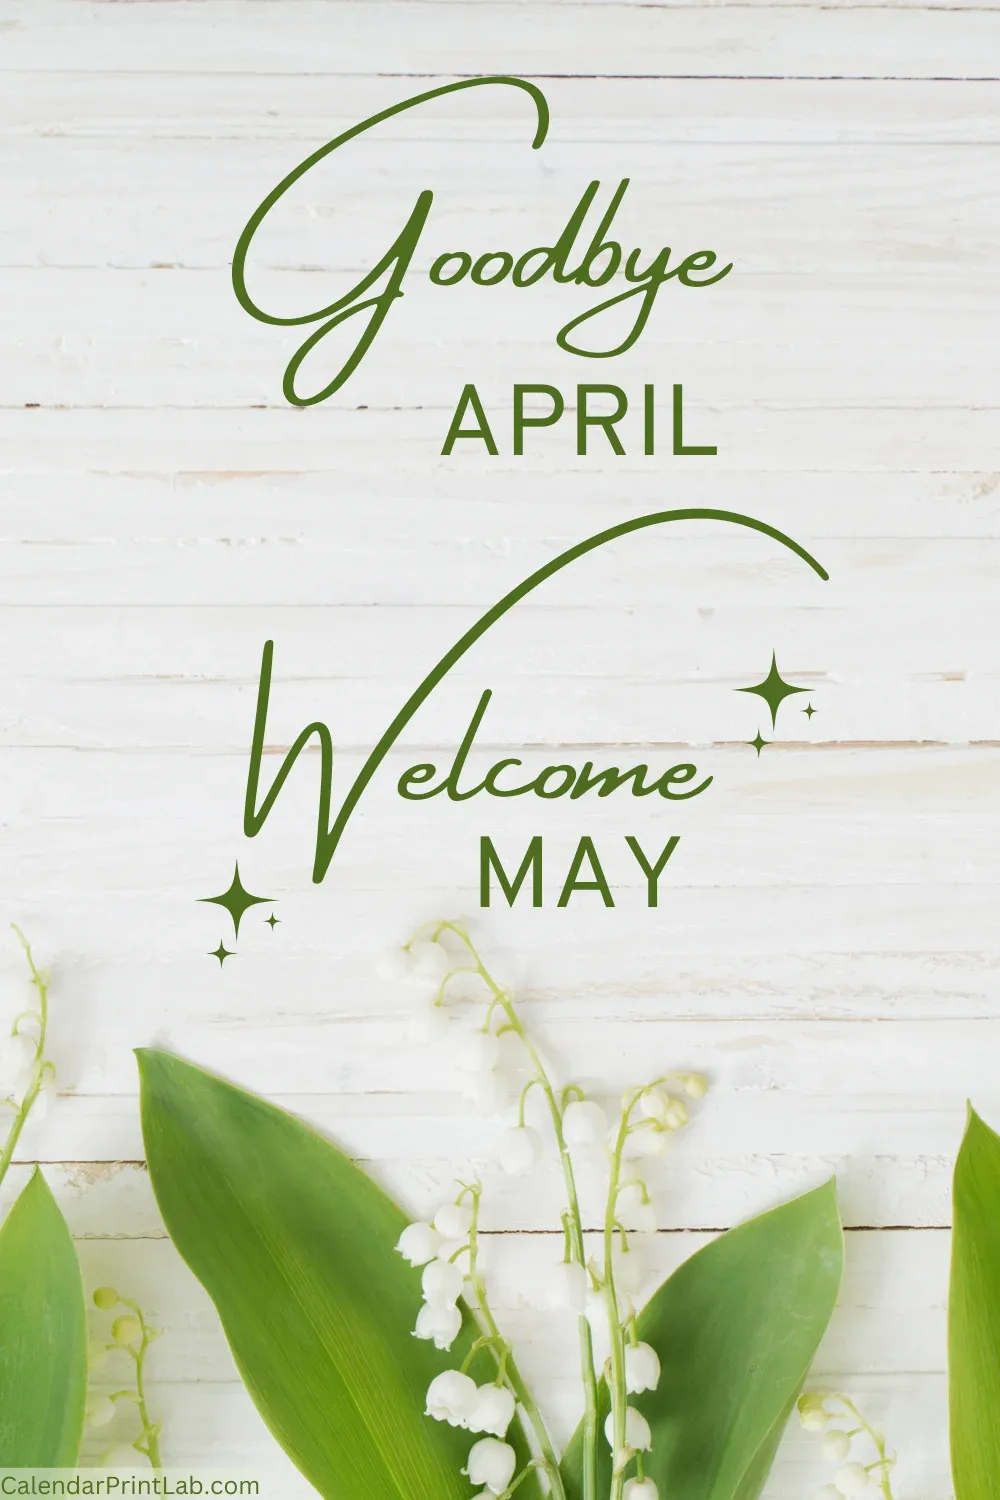 Goodbye April Welcome May Photo